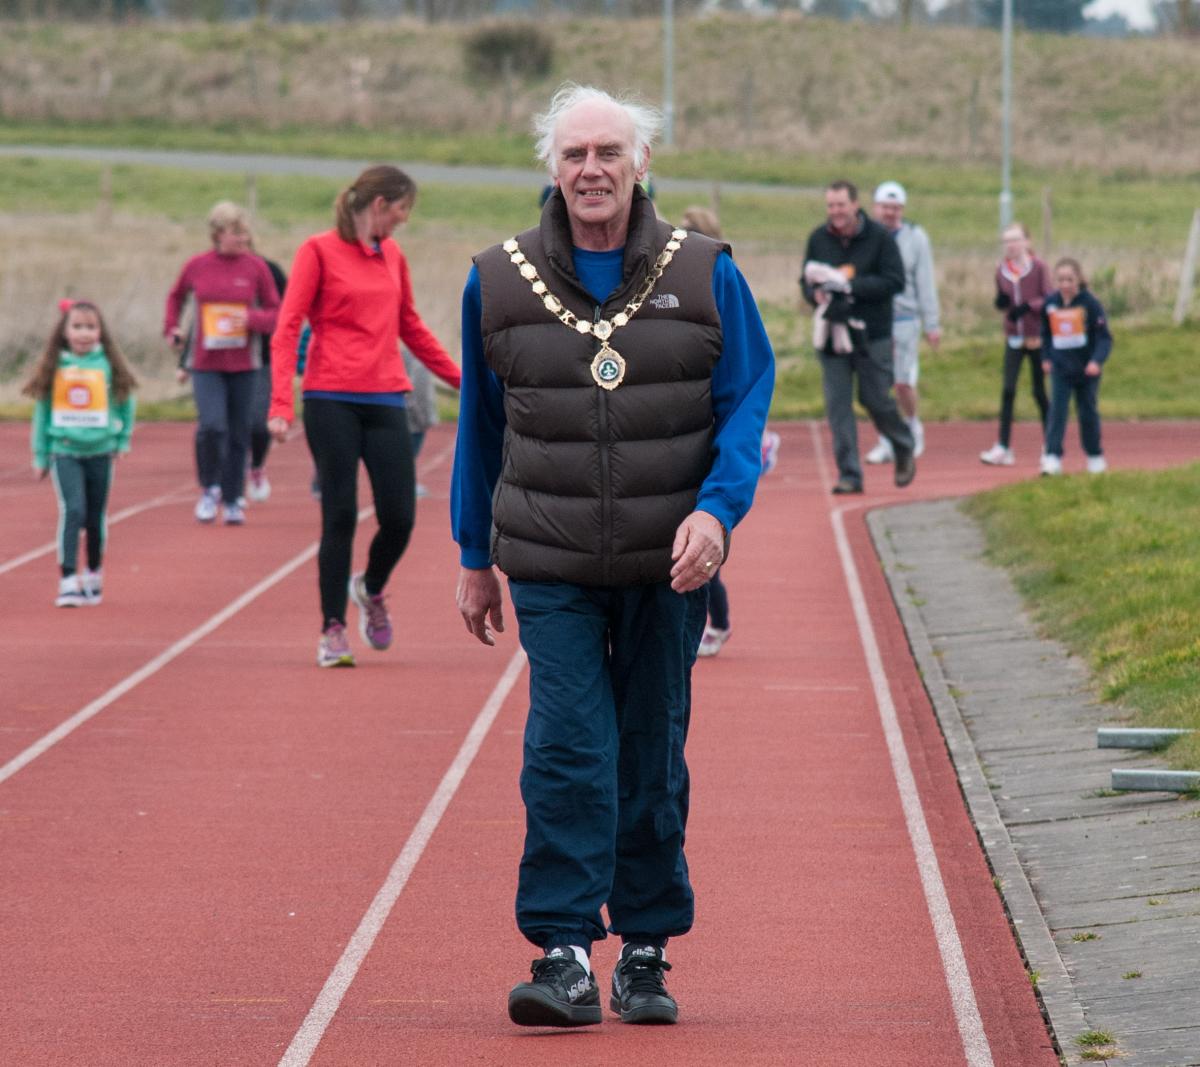 Councillor Chris Rogers, chairman of Wyre Forest District Council, who walked the Sainsbury's Sport Relief Stourport Mile